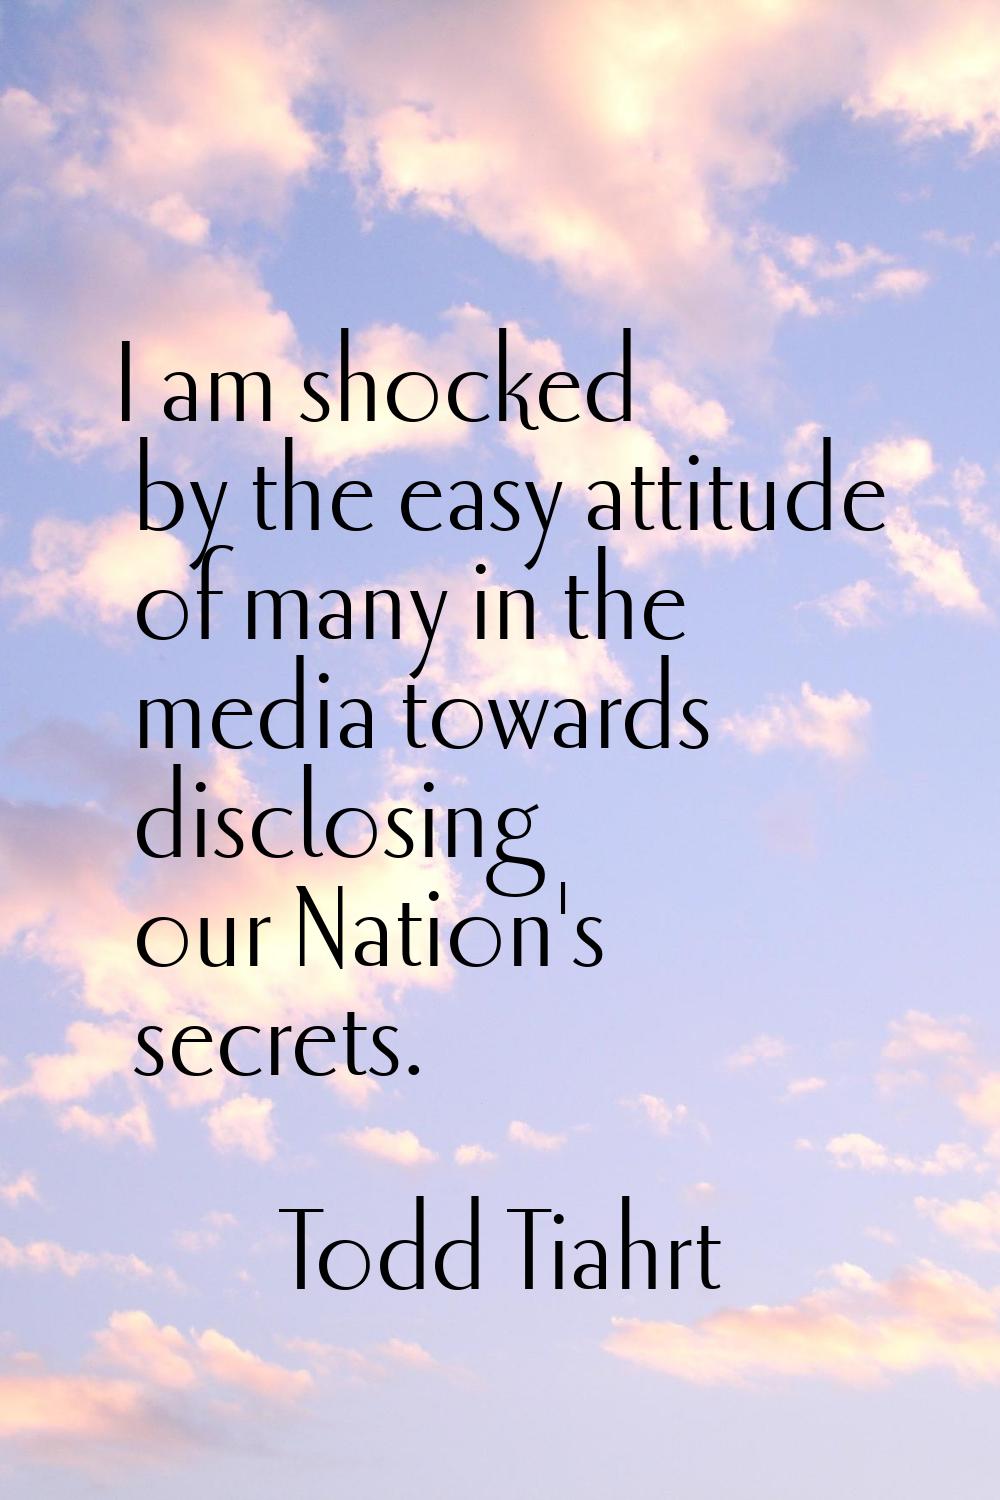 I am shocked by the easy attitude of many in the media towards disclosing our Nation's secrets.